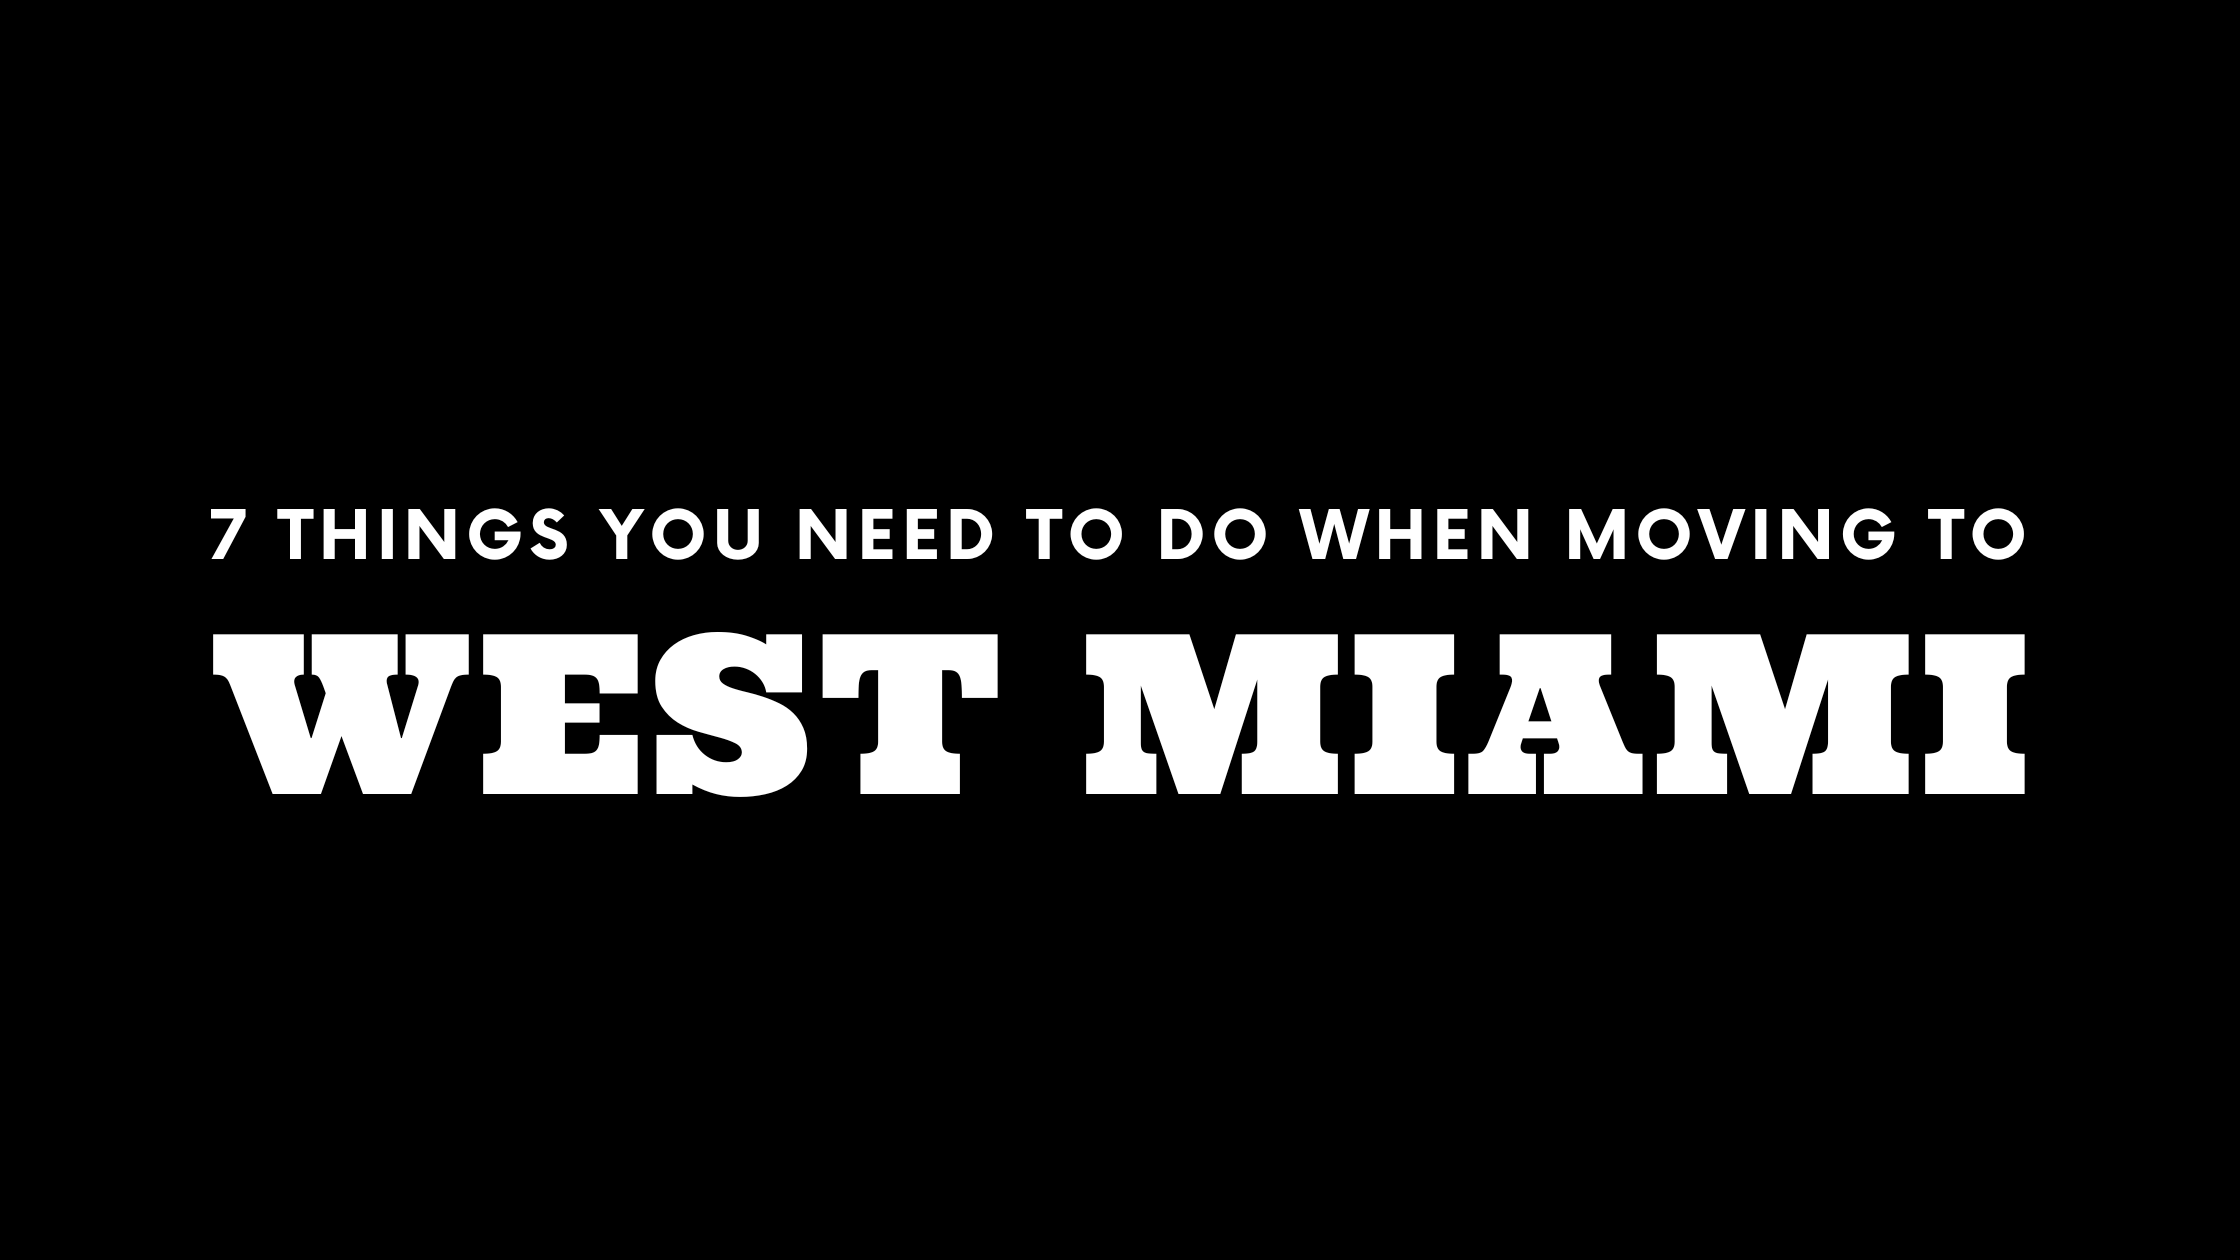 Moving to West Miami? 7 Things You Need To Do Immediately!